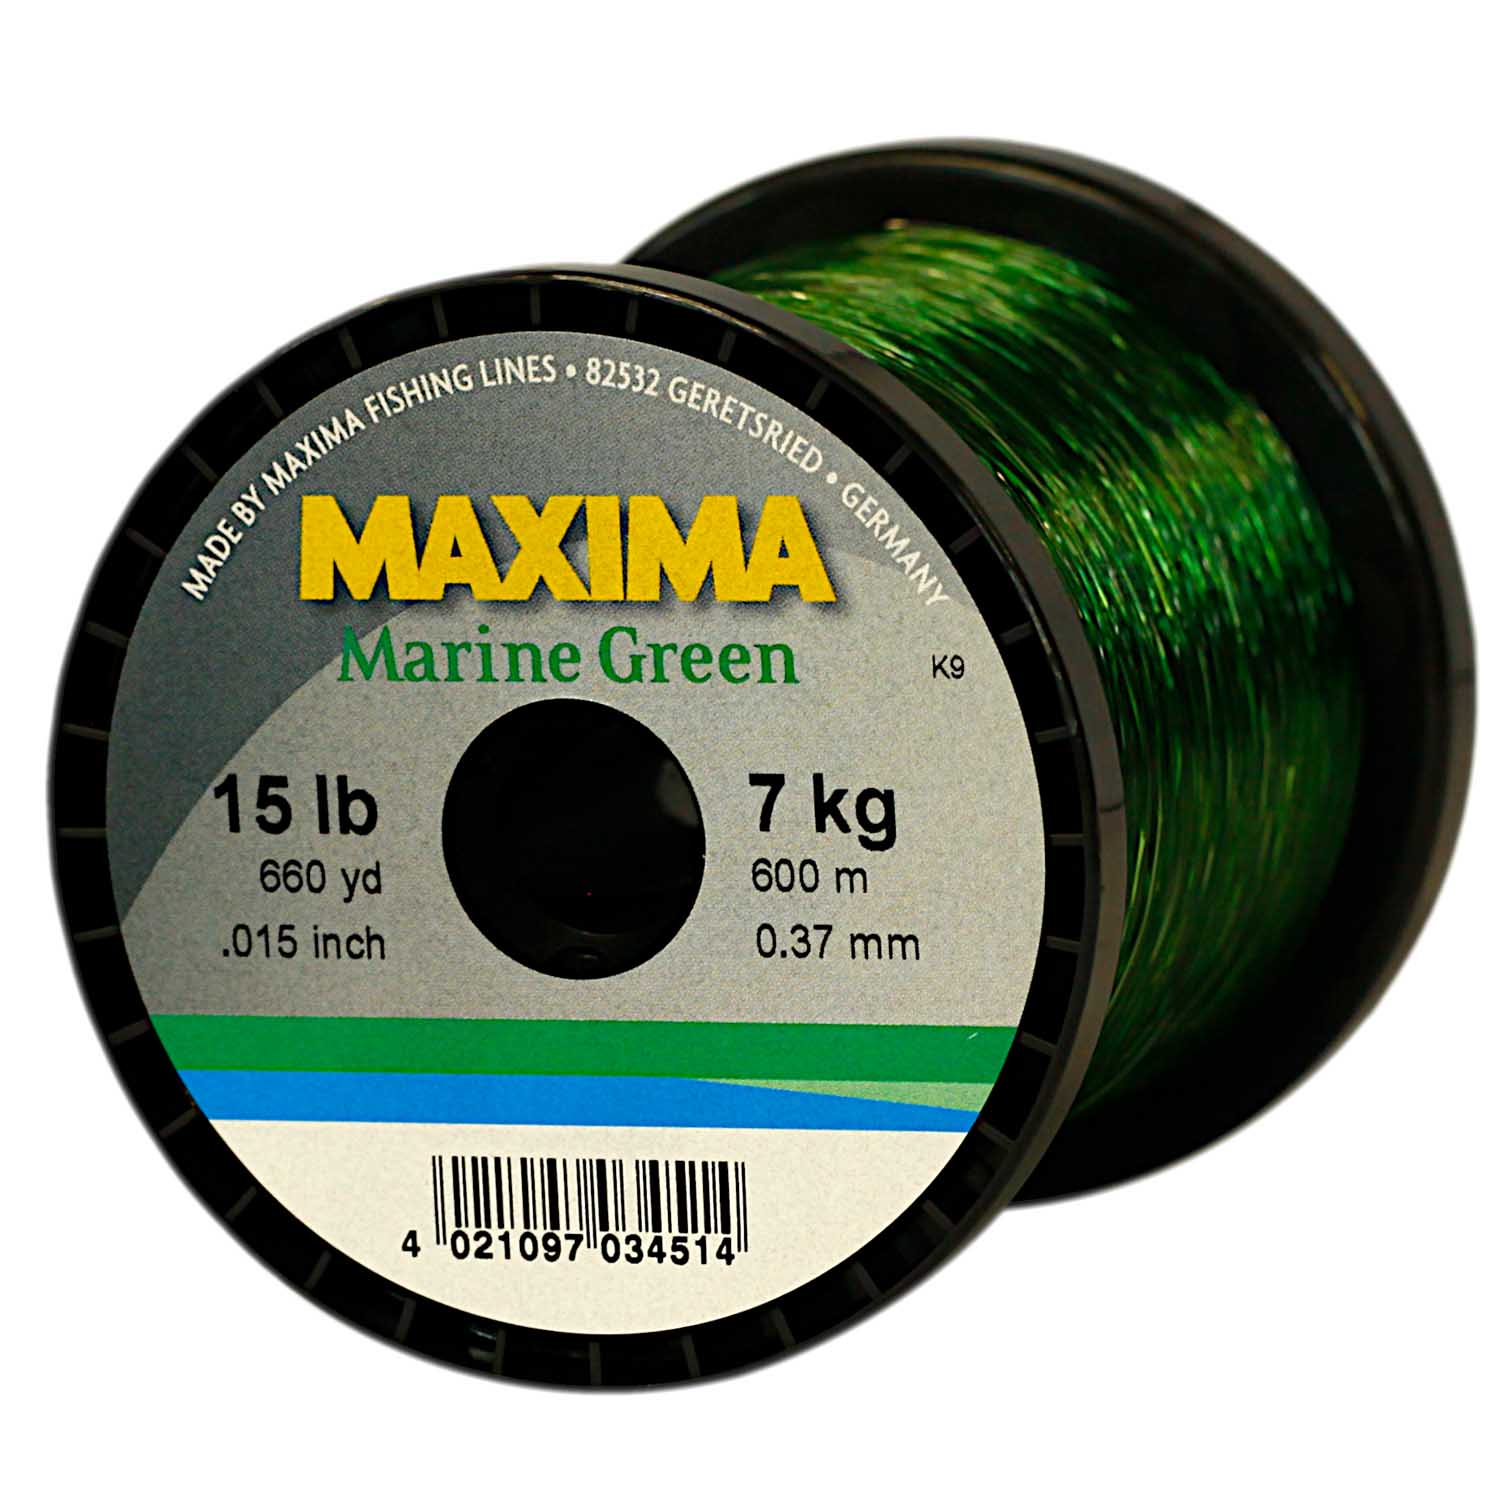 https://www.showspace.co.za/showspaceimages/kingfisher/MAXIMA_M.GREEN_15lb_7kg_600m_x2ckwg.jpg